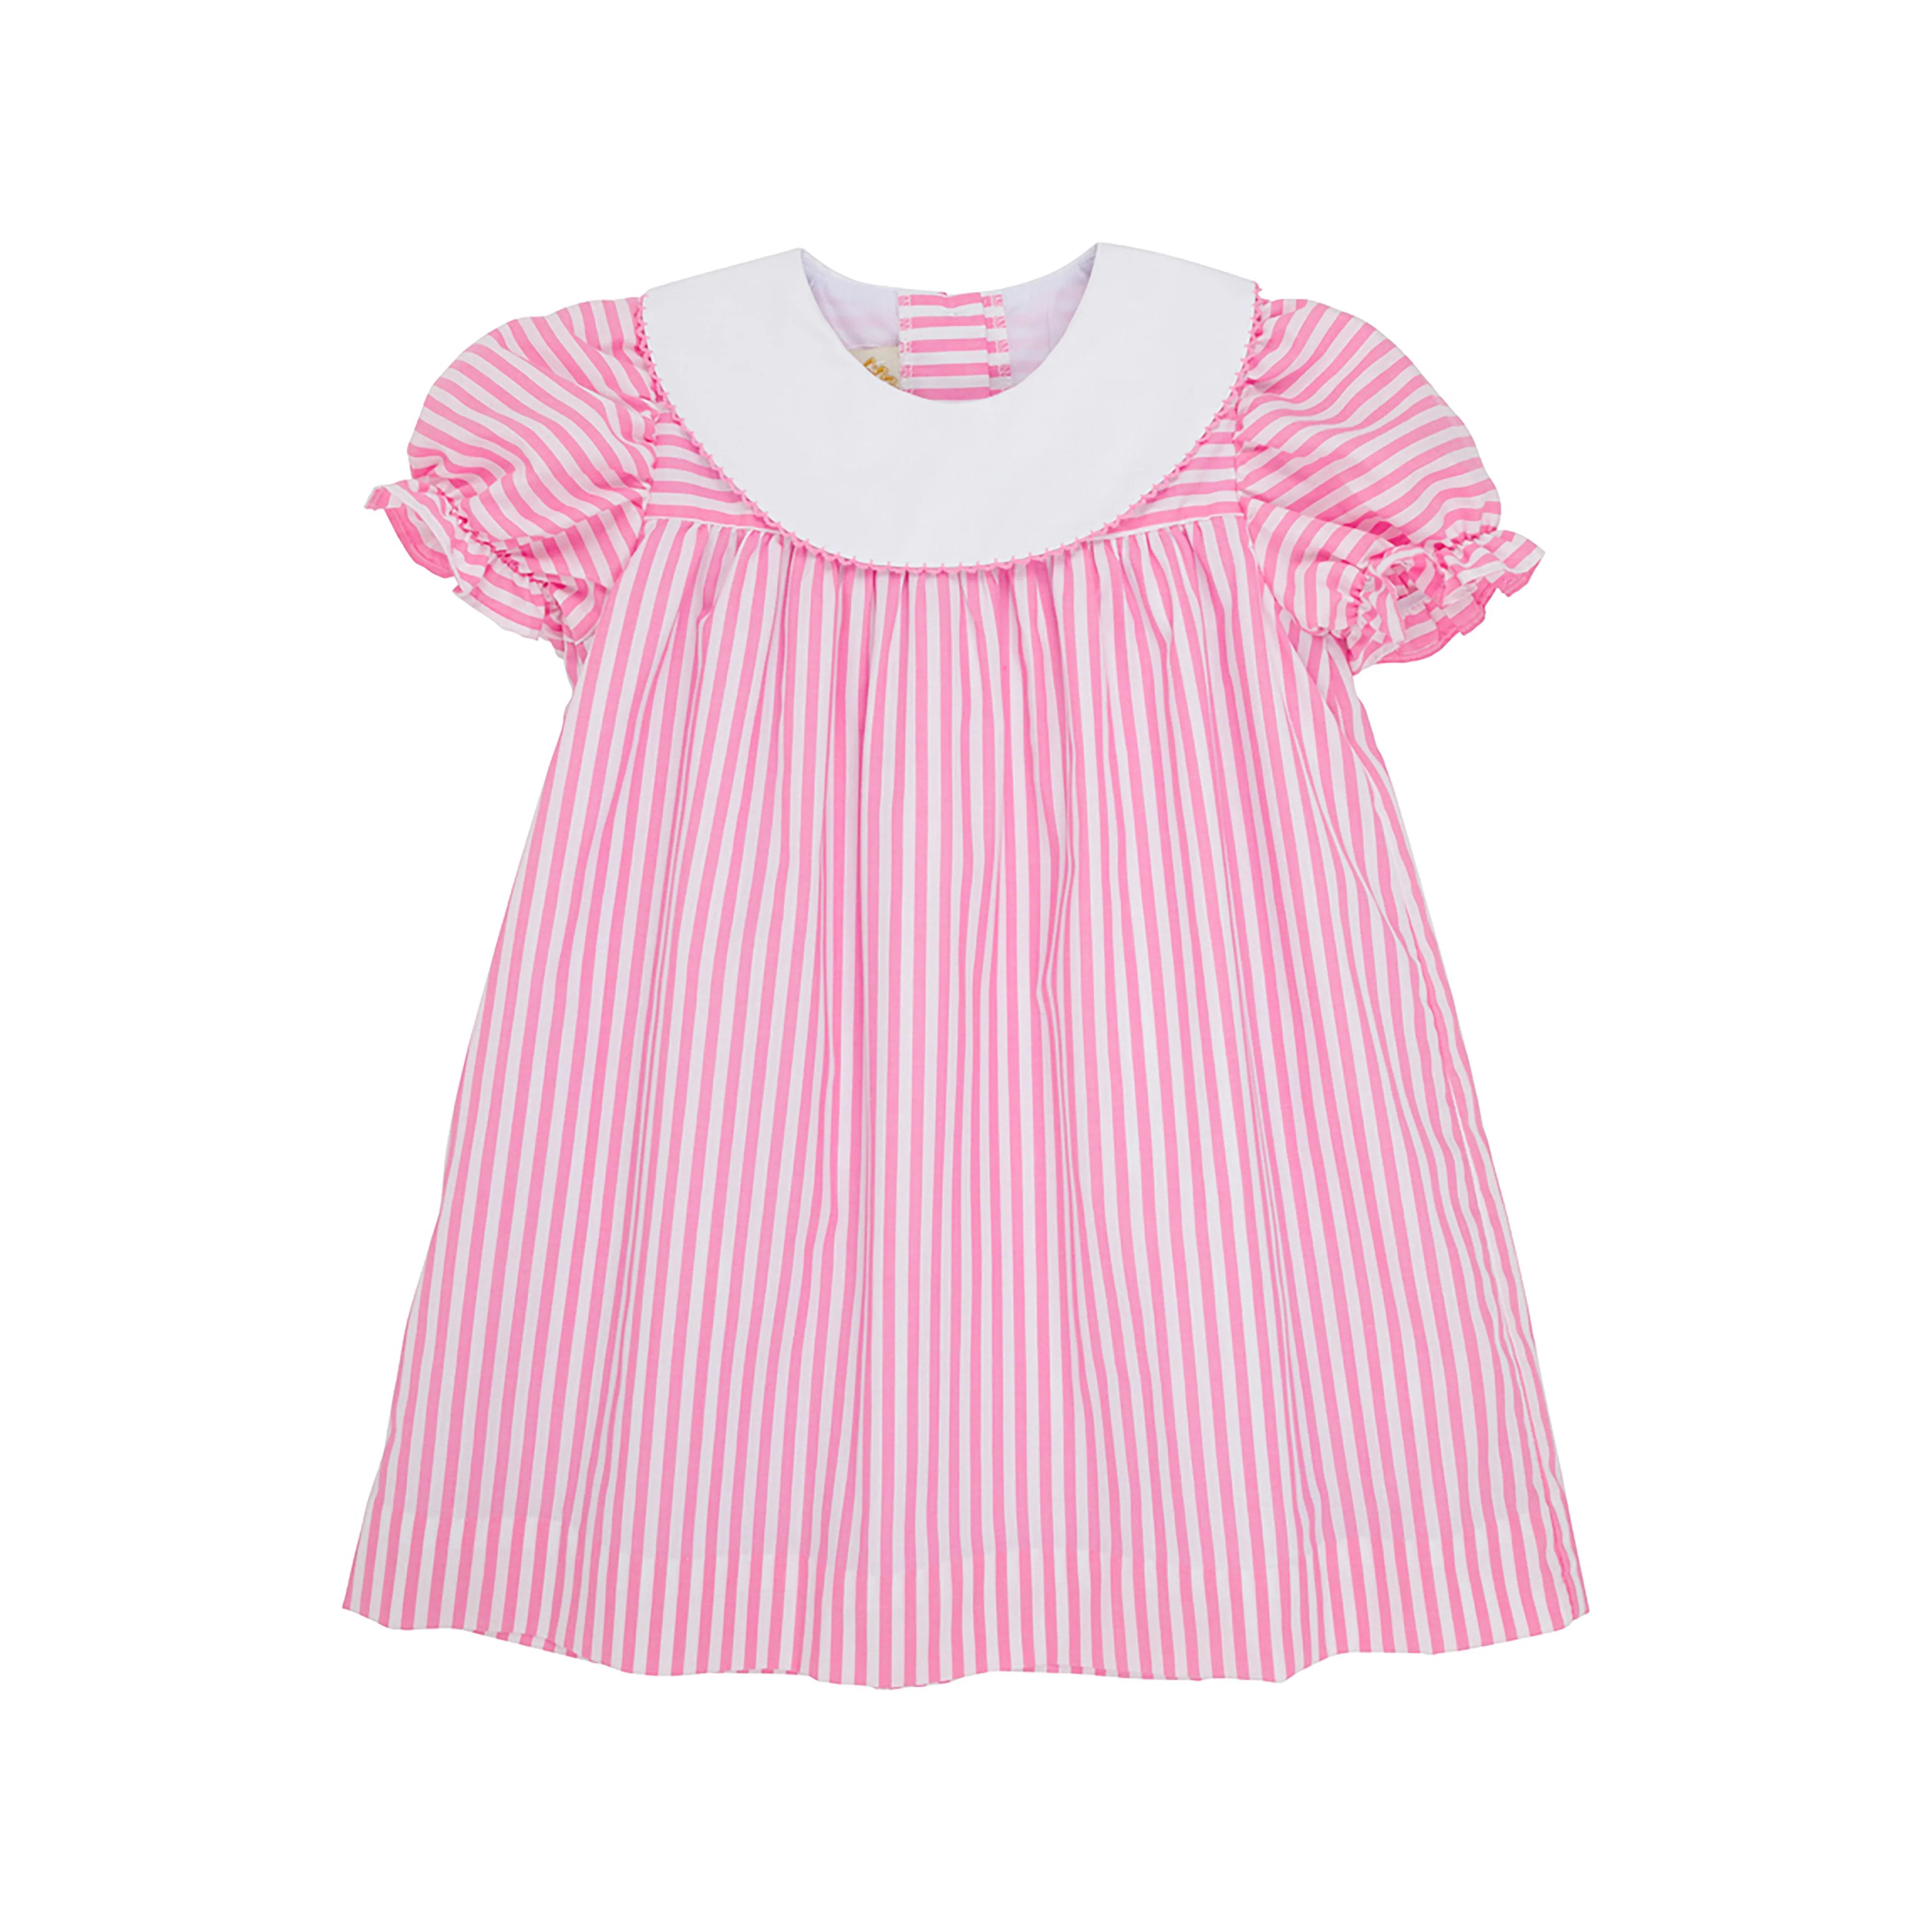 Calloway Collar Dress - Providence Pink Stripe with Worth Avenue White & Hamptons Hot Pink | The Beaufort Bonnet Company